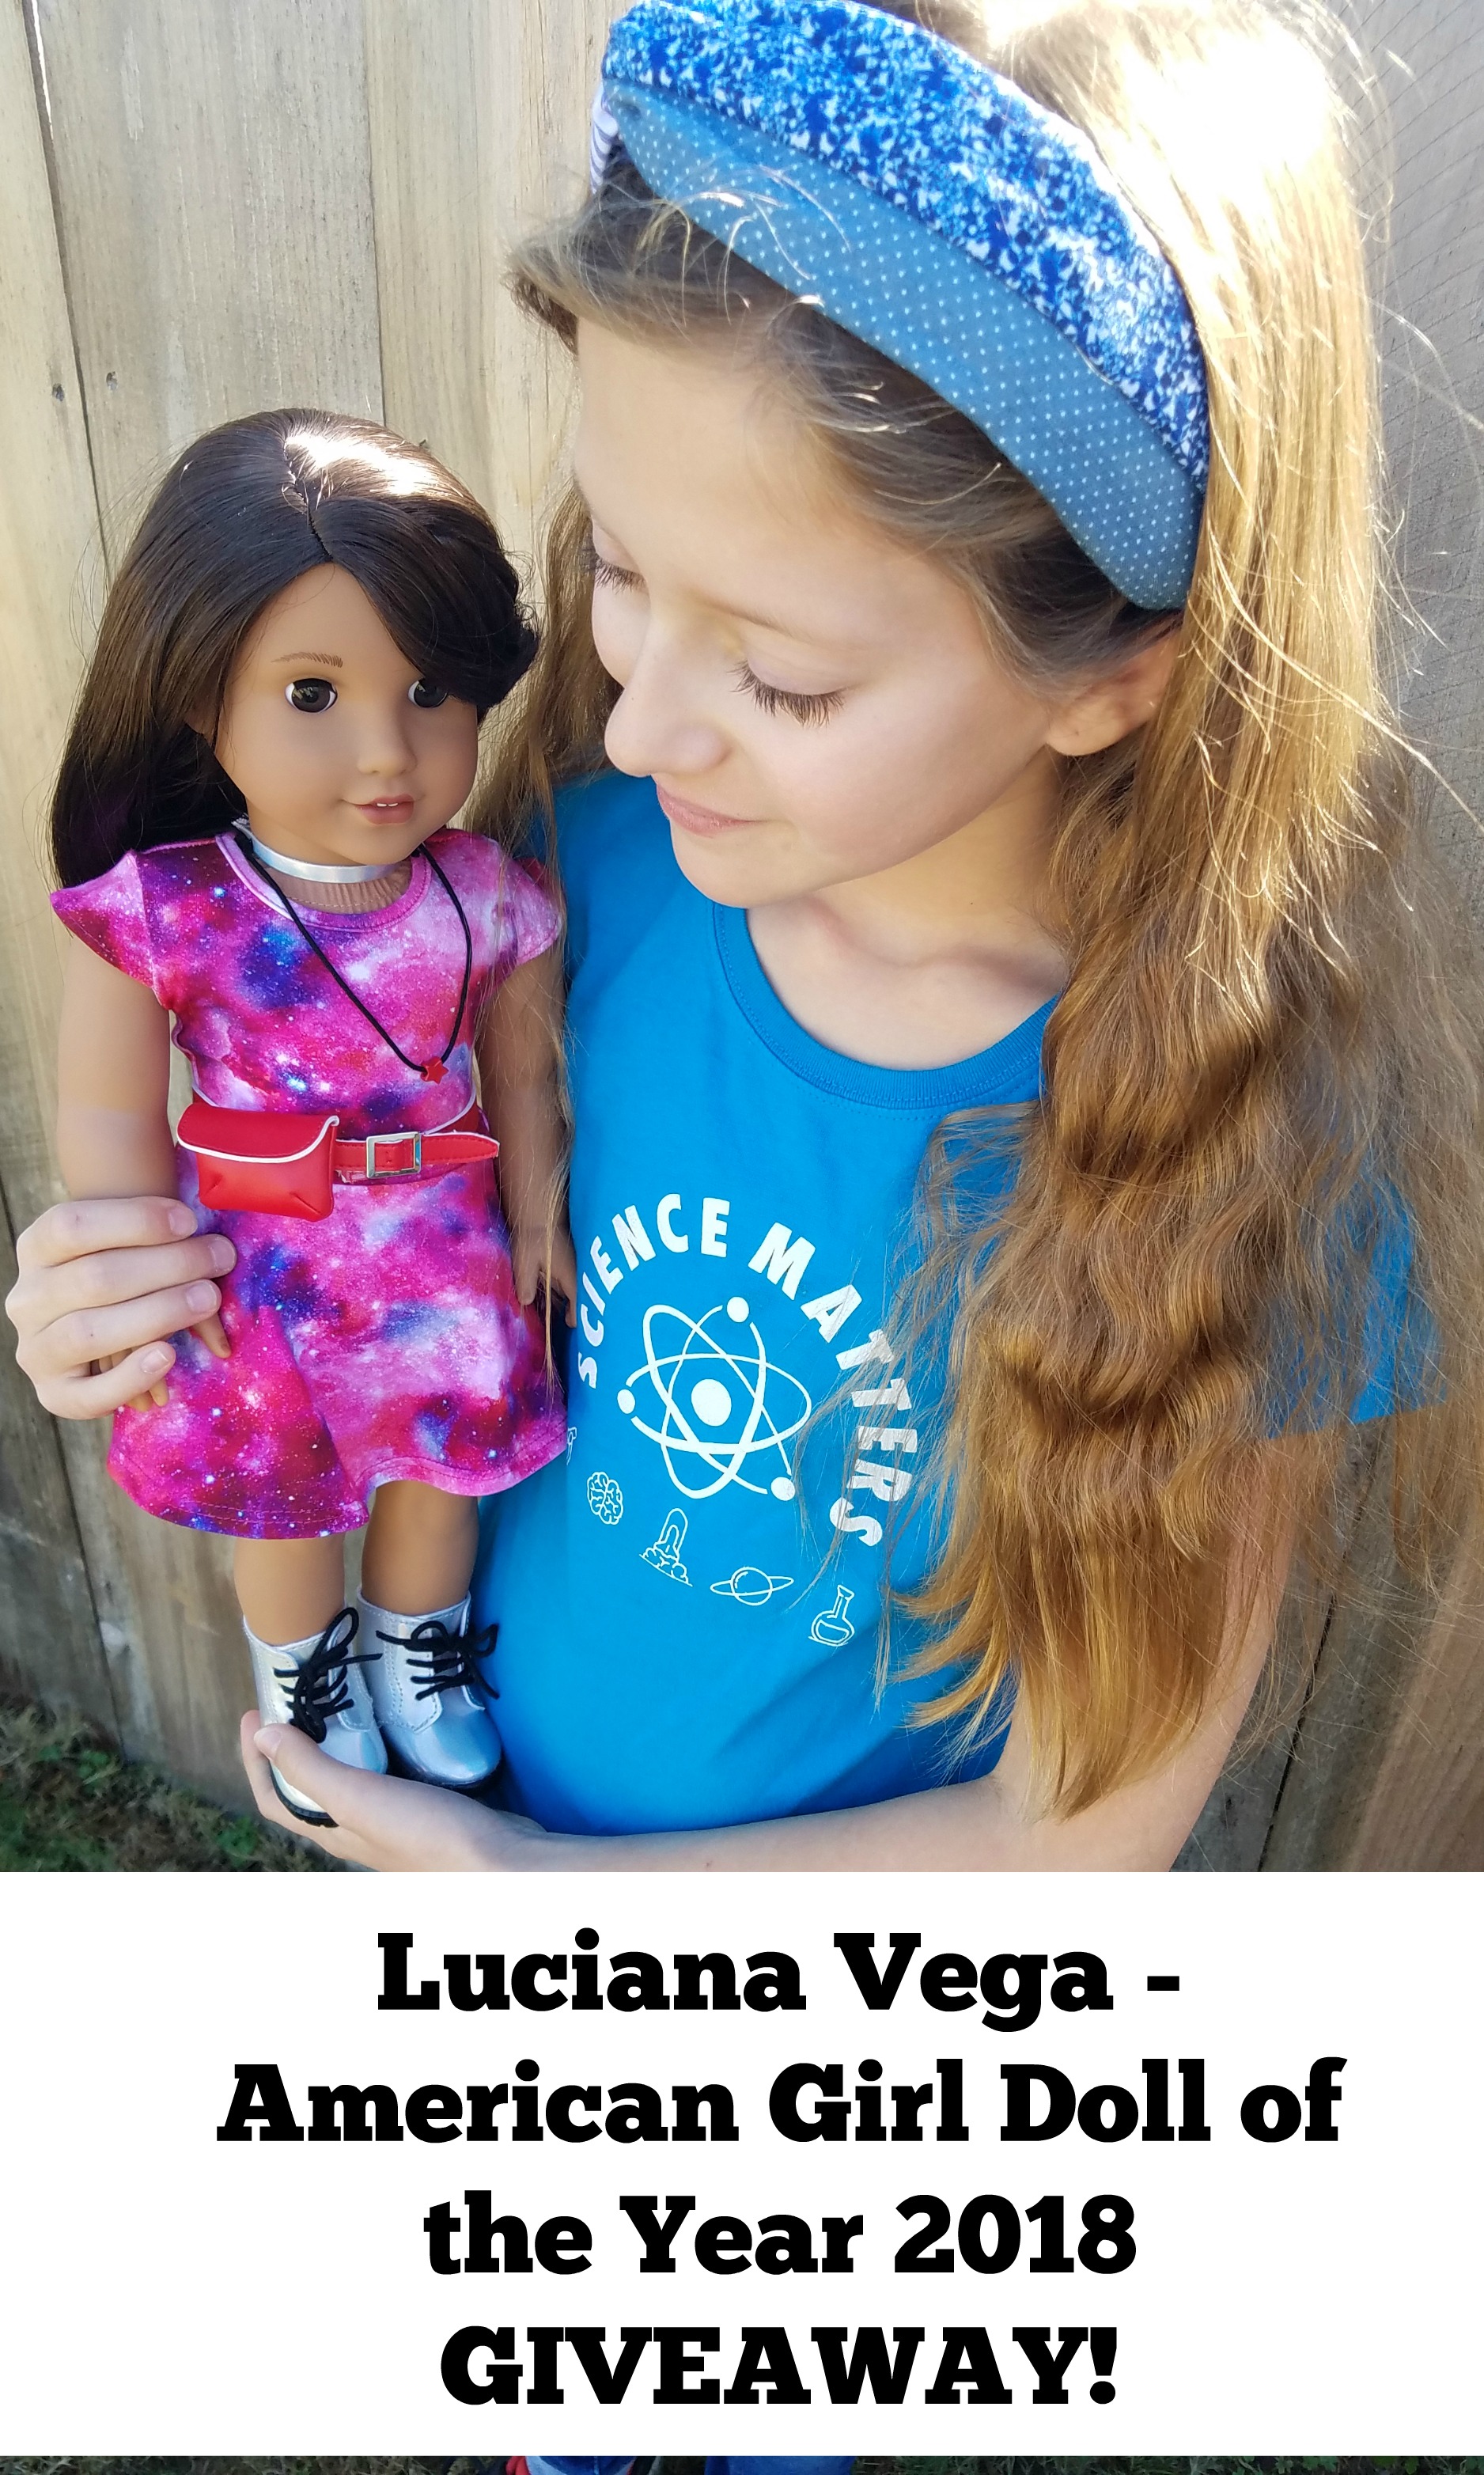 Giveaway for American Girl Doll of the Year 2018 Luciana Vega from Highlights Along The Way